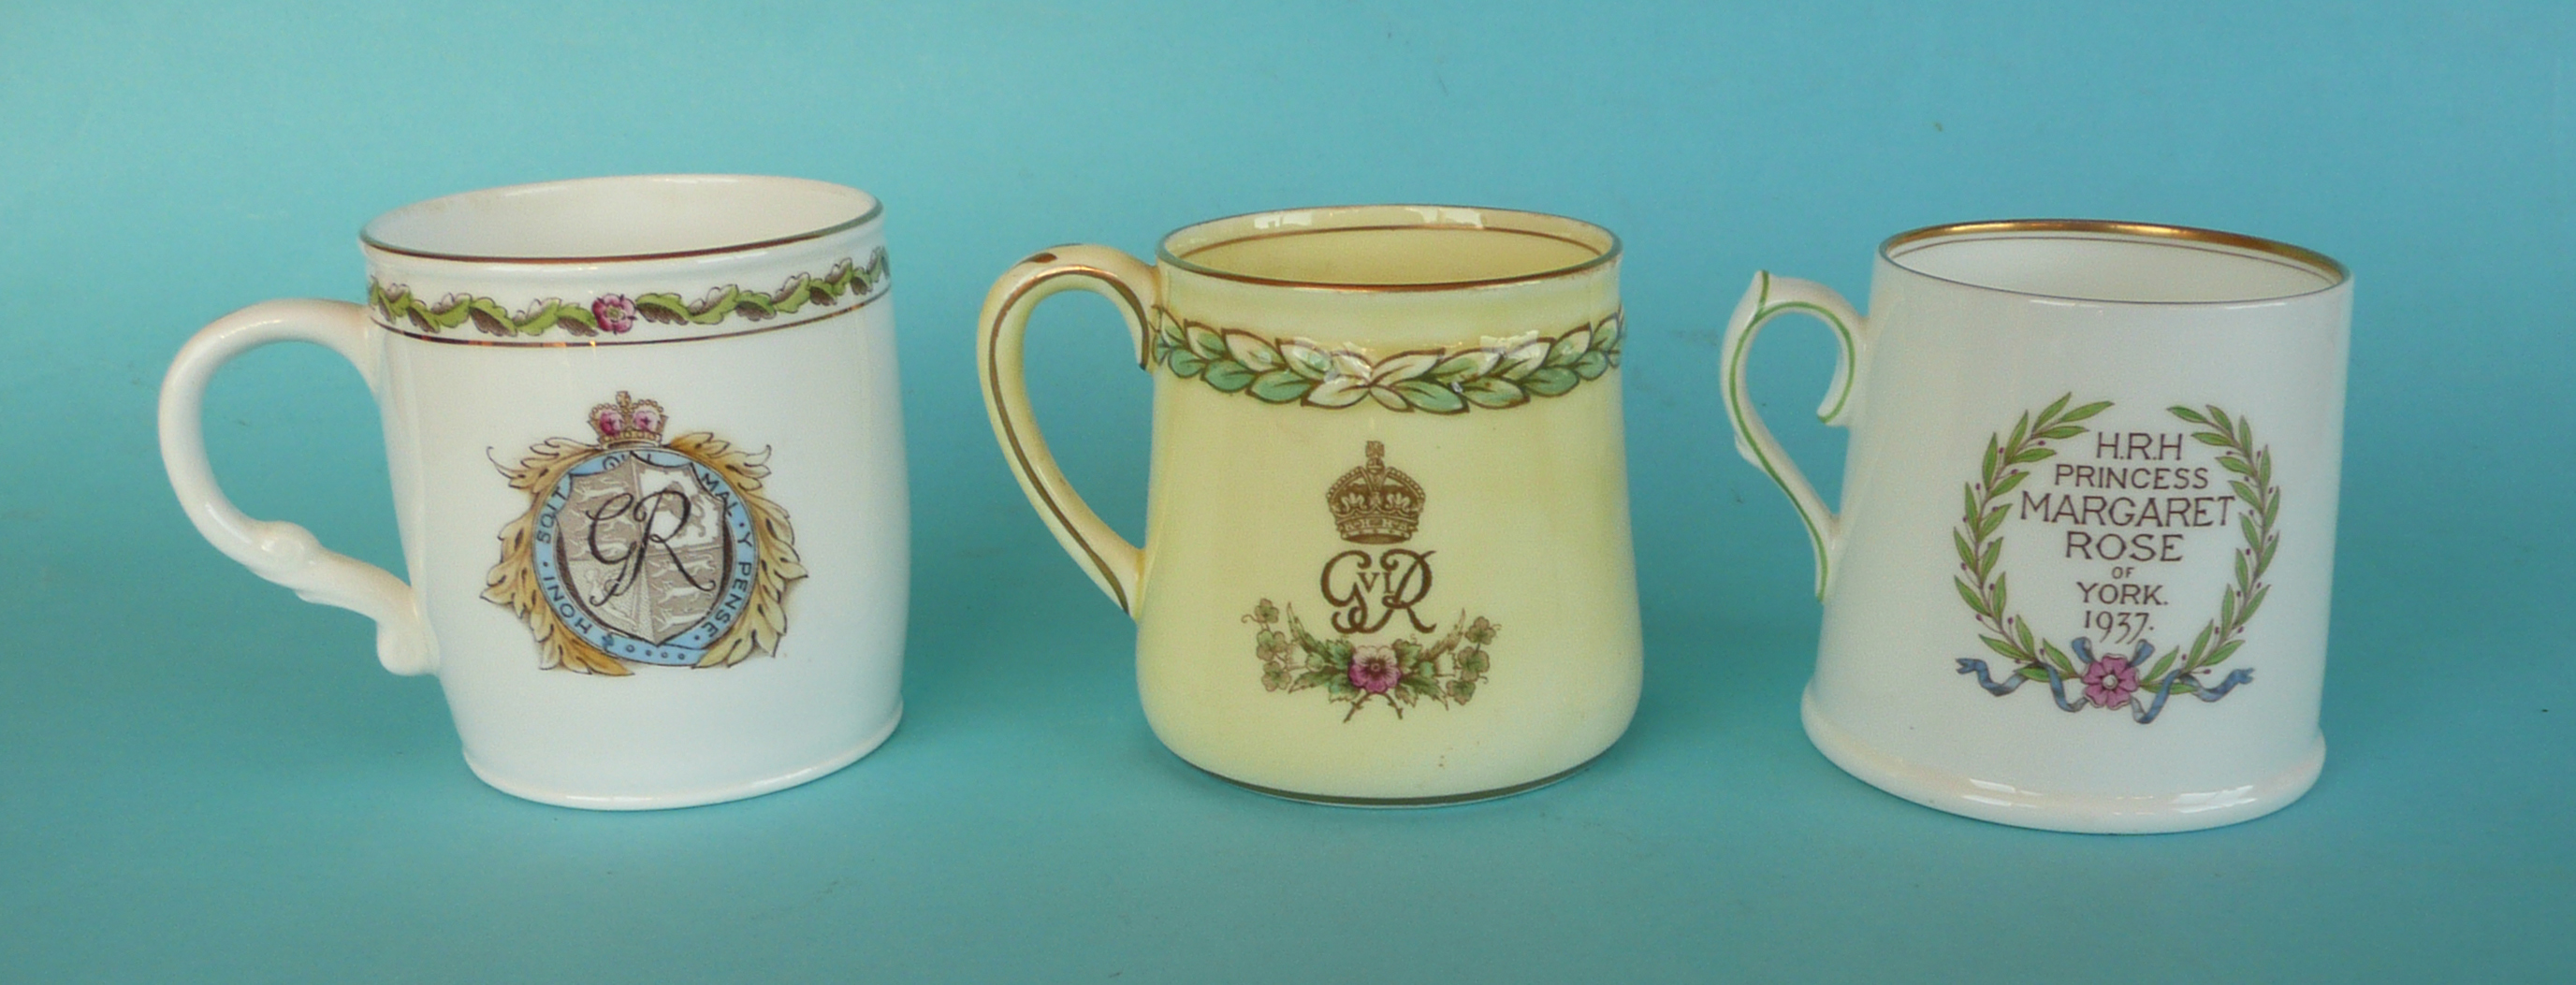 1937 Coronation: a Royal Doulton porcelain mug with named and dated portrait of Princess Margaret - Image 2 of 3